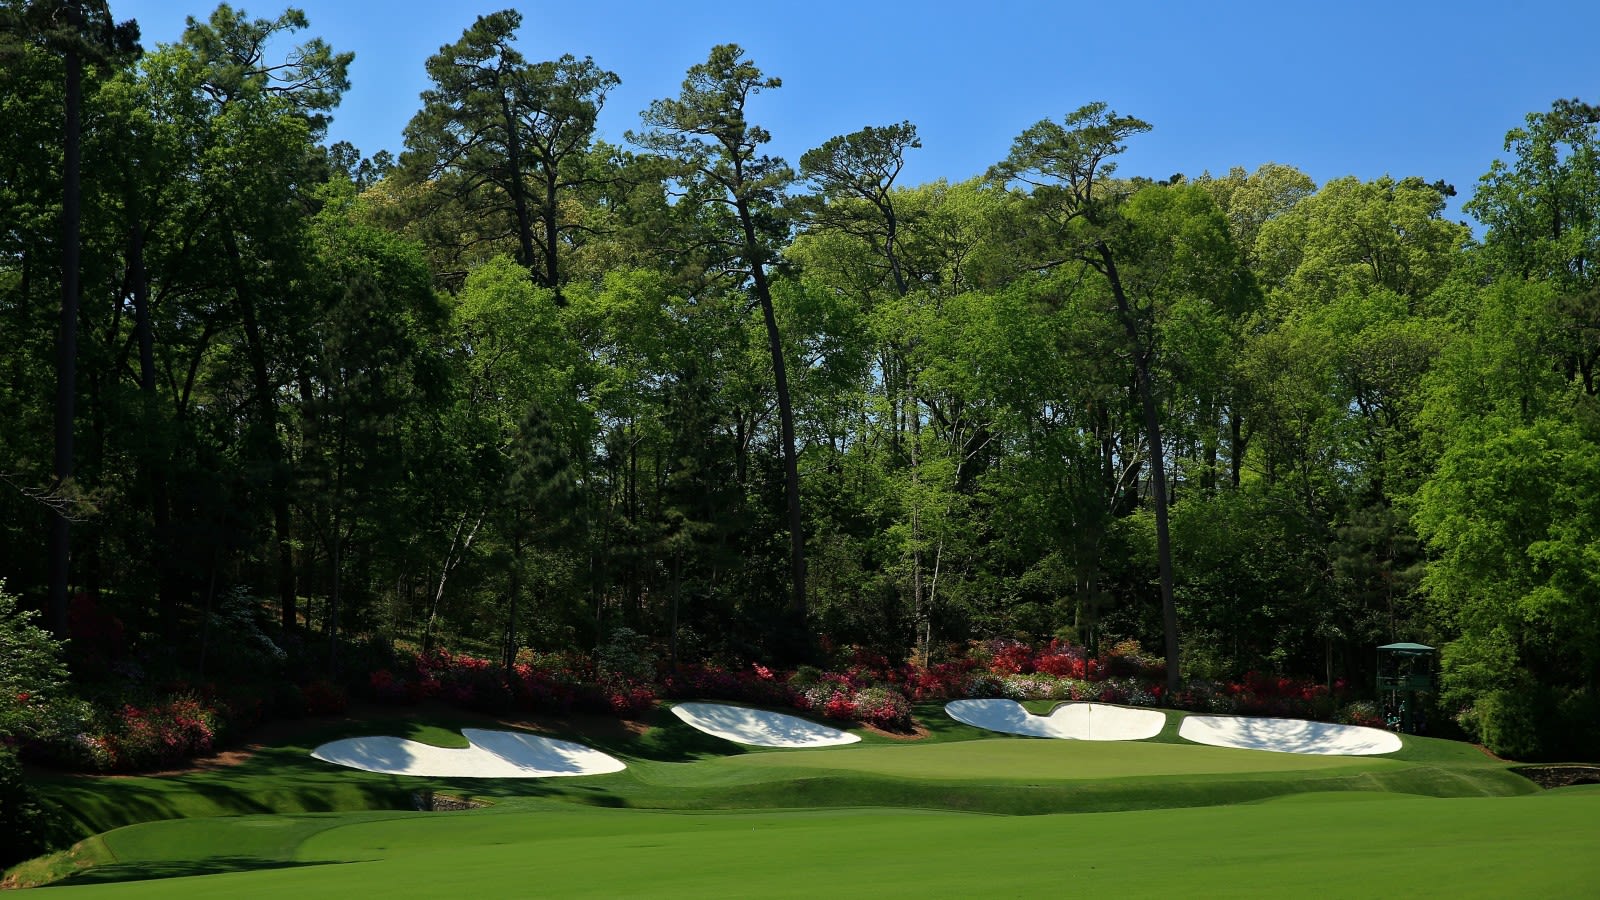 The famed 13th hole at Augusta National Golf Club. (David Cannon/Getty Images)